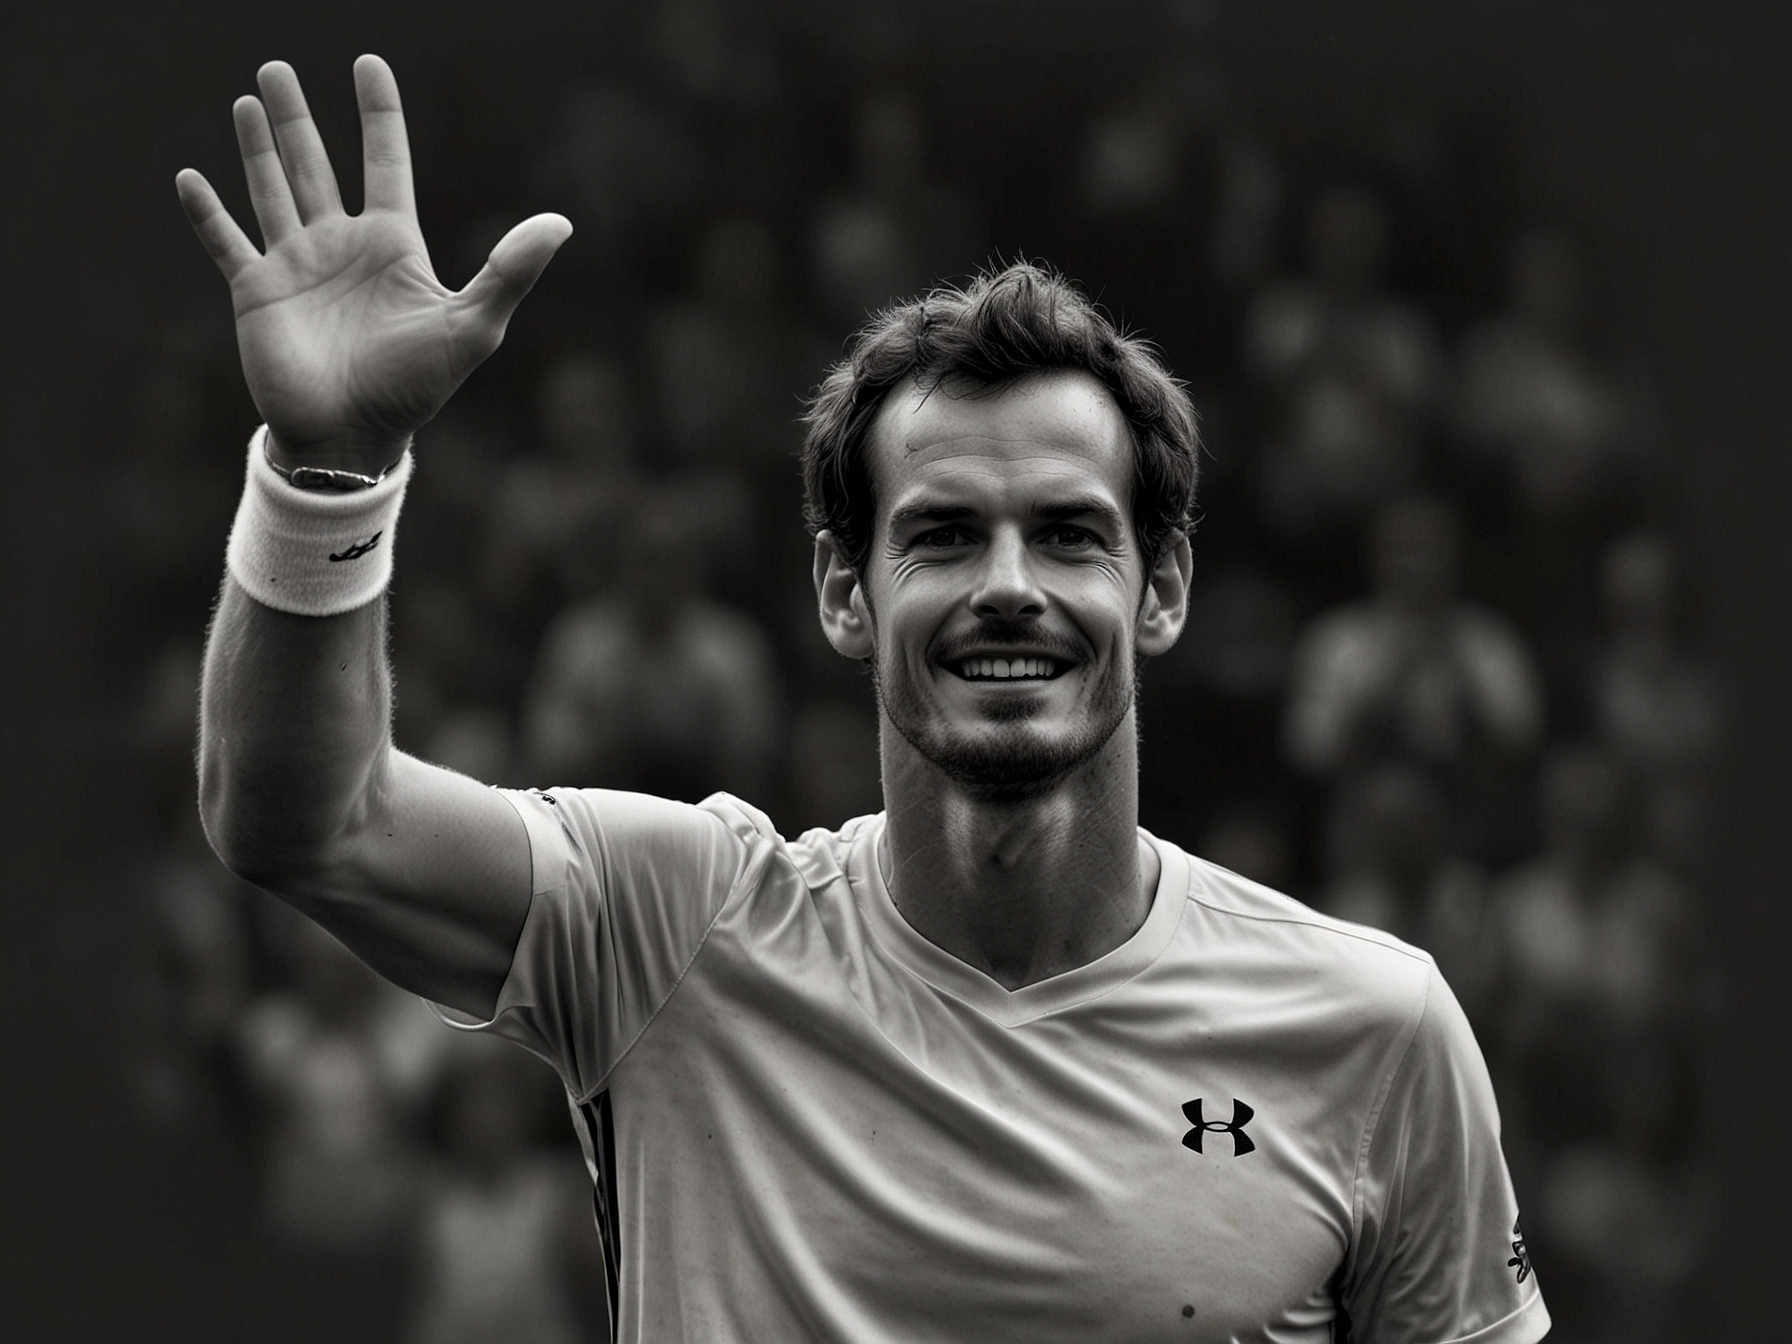 Andy Murray waving to fans with a determined look, symbolizing his resilience and continued efforts to return to tennis despite numerous setbacks and surgeries.